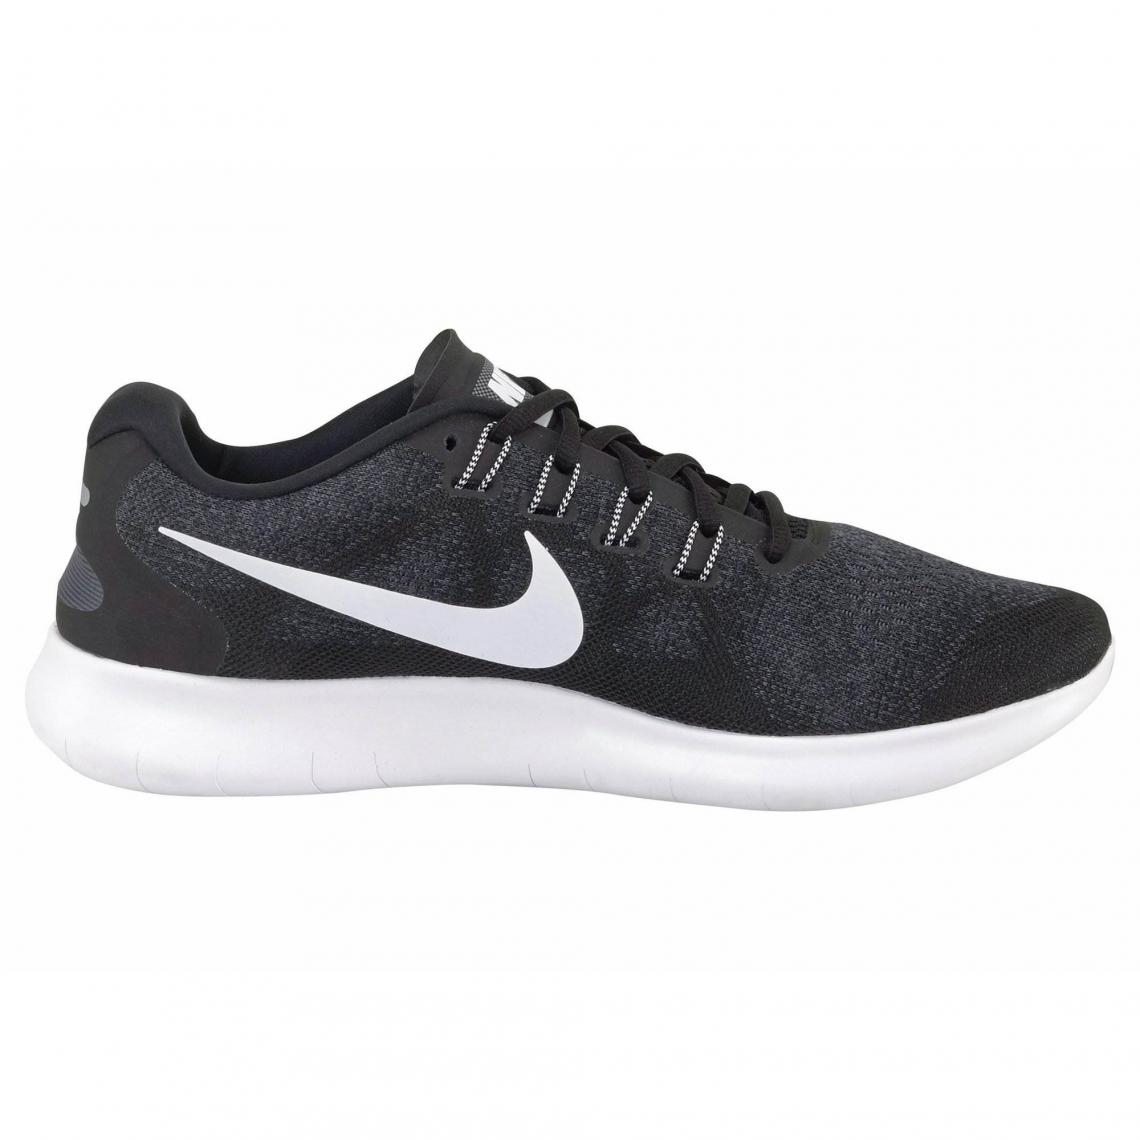 nike free chaussures femme nike,Chaussure de running Nike Free RN 5.0 pour  Femme. Nike FR